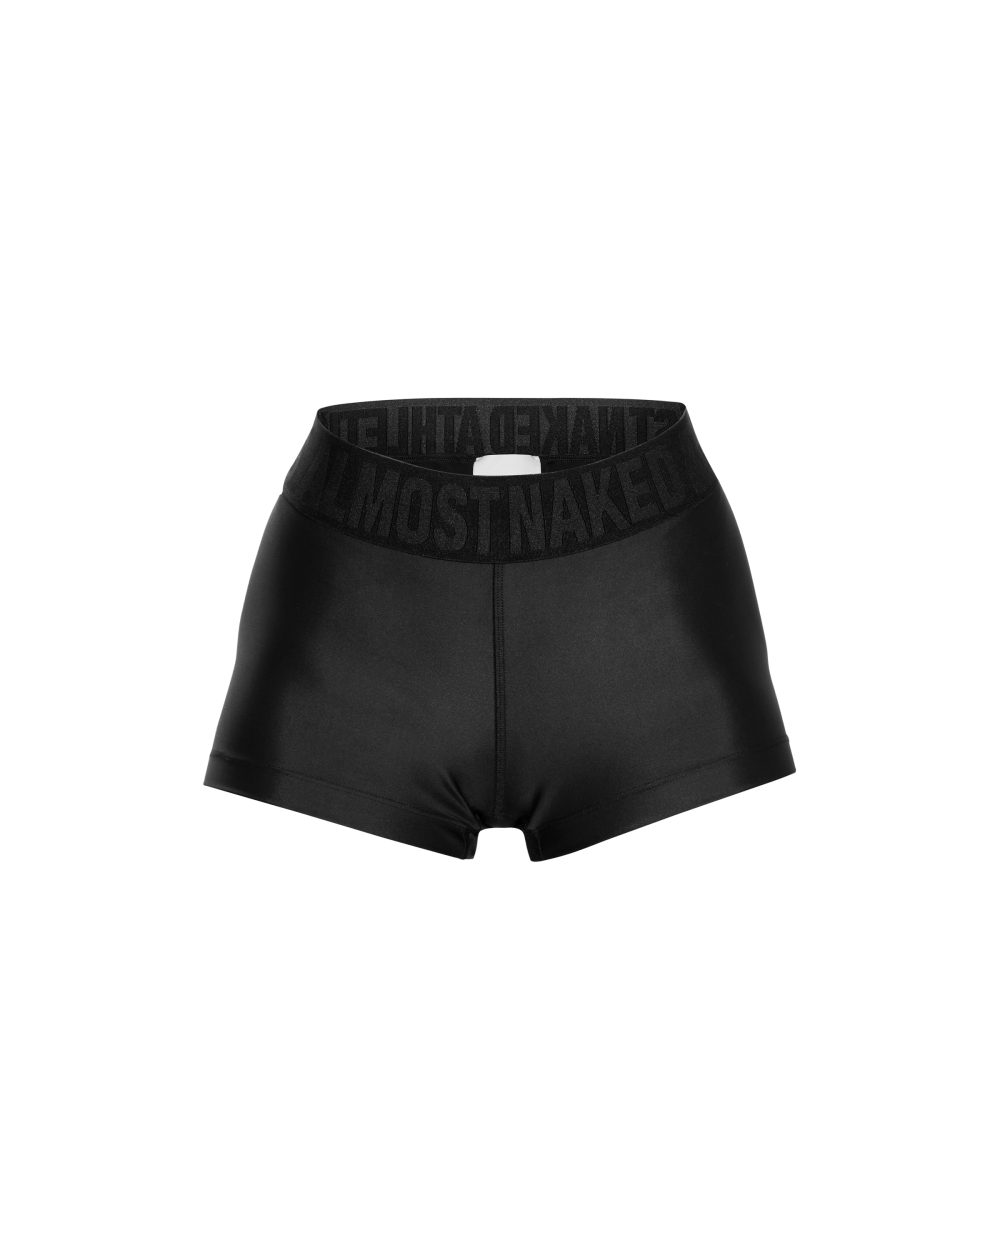 Gym shorts women's | Almost Naked Athletics